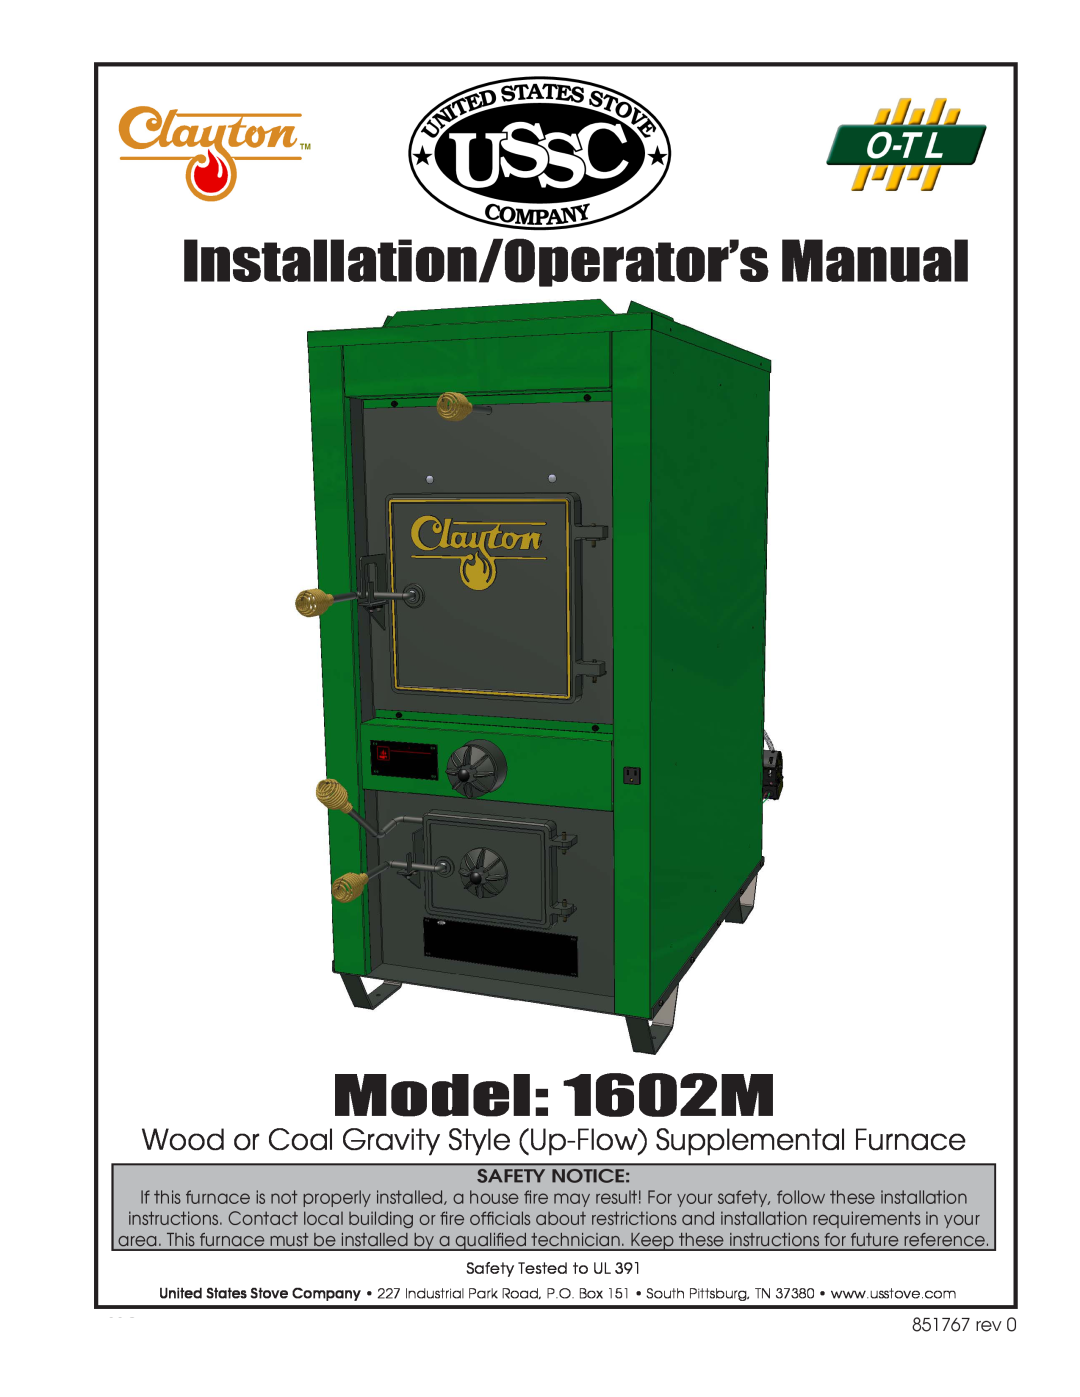 United States Stove installation instructions Ussc, Installation/Operator’s Manual Model 1602M, Safety Notice, Ompan 